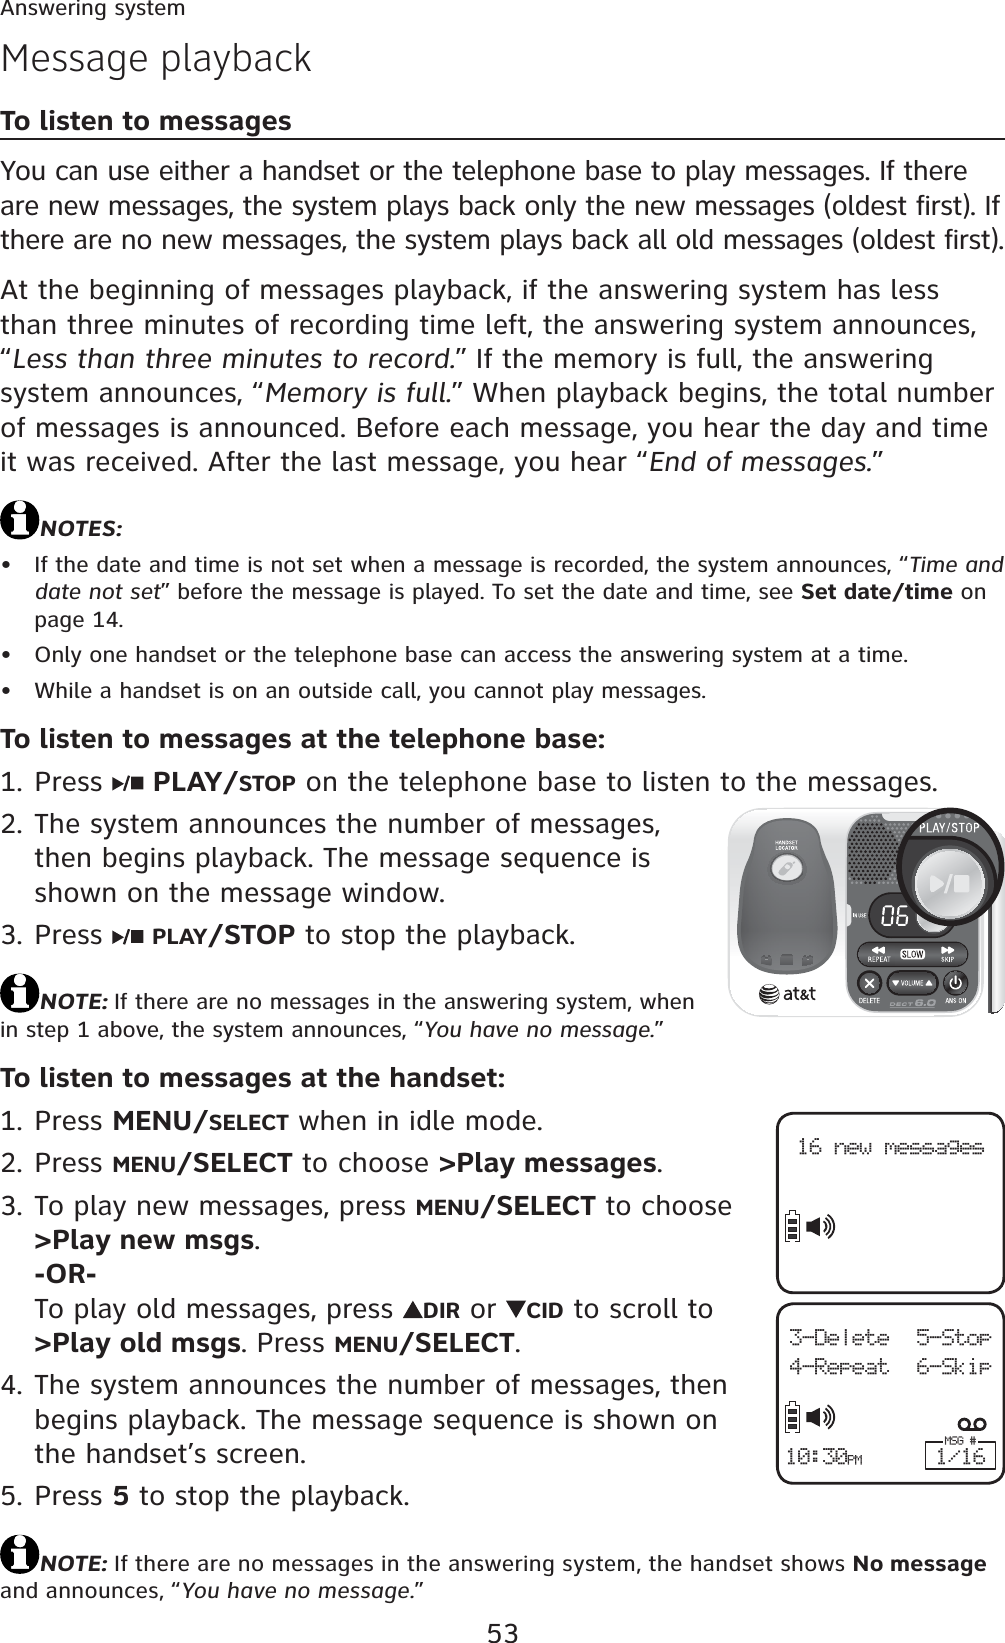 53Answering systemMessage playbackTo listen to messagesYou can use either a handset or the telephone base to play messages. If there are new messages, the system plays back only the new messages (oldest first). If there are no new messages, the system plays back all old messages (oldest first).At the beginning of messages playback, if the answering system has less than three minutes of recording time left, the answering system announces, “Less than three minutes to record.” If the memory is full, the answering system announces, “Memory is full.” When playback begins, the total number of messages is announced. Before each message, you hear the day and time it was received. After the last message, you hear “End of messages.”NOTES:If the date and time is not set when a message is recorded, the system announces, “Time and date not set” before the message is played. To set the date and time, see Set date/time on page 14.Only one handset or the telephone base can access the answering system at a time.While a handset is on an outside call, you cannot play messages.To listen to messages at the telephone base:Press  PLAY/STOP on the telephone base to listen to the messages.The system announces the number of messages, then begins playback. The message sequence is shown on the message window.Press  PLAY/STOP to stop the playback.NOTE: If there are no messages in the answering system, when in step 1 above, the system announces, “You have no message.”To listen to messages at the handset:Press MENU/SELECT when in idle mode.Press MENU/SELECT to choose &gt;Play messages.To play new messages, press MENU/SELECT to choose &gt;Play new msgs.-OR-To play old messages, press  DIR or  CID to scroll to &gt;Play old msgs. Press MENU/SELECT.The system announces the number of messages, then begins playback. The message sequence is shown on the handset’s screen. Press 5 to stop the playback.NOTE: If there are no messages in the answering system, the handset shows No message and announces, “You have no message.”•••1.2.3.1.2.3.4.5.16 new messages3-Delete 5-Stop4-Repeat 6-SkipMSG #1/1610:30PM